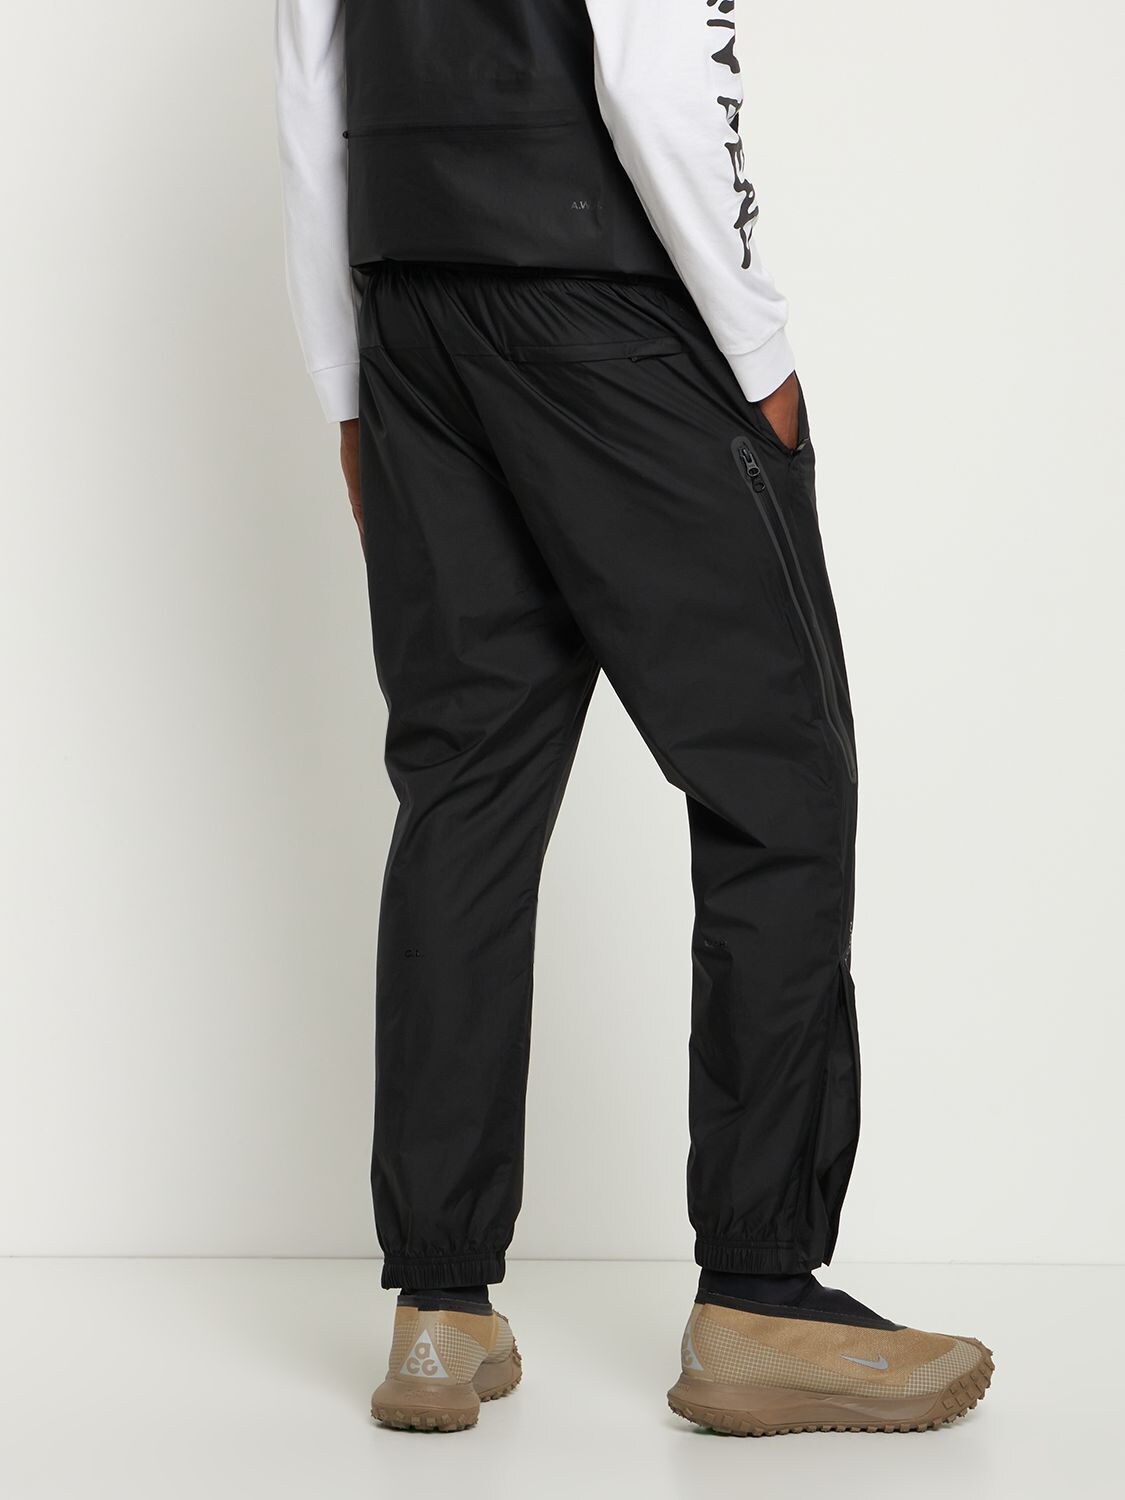 Nike x Nocta Track Pant – buy now at Asphaltgold Online Store!